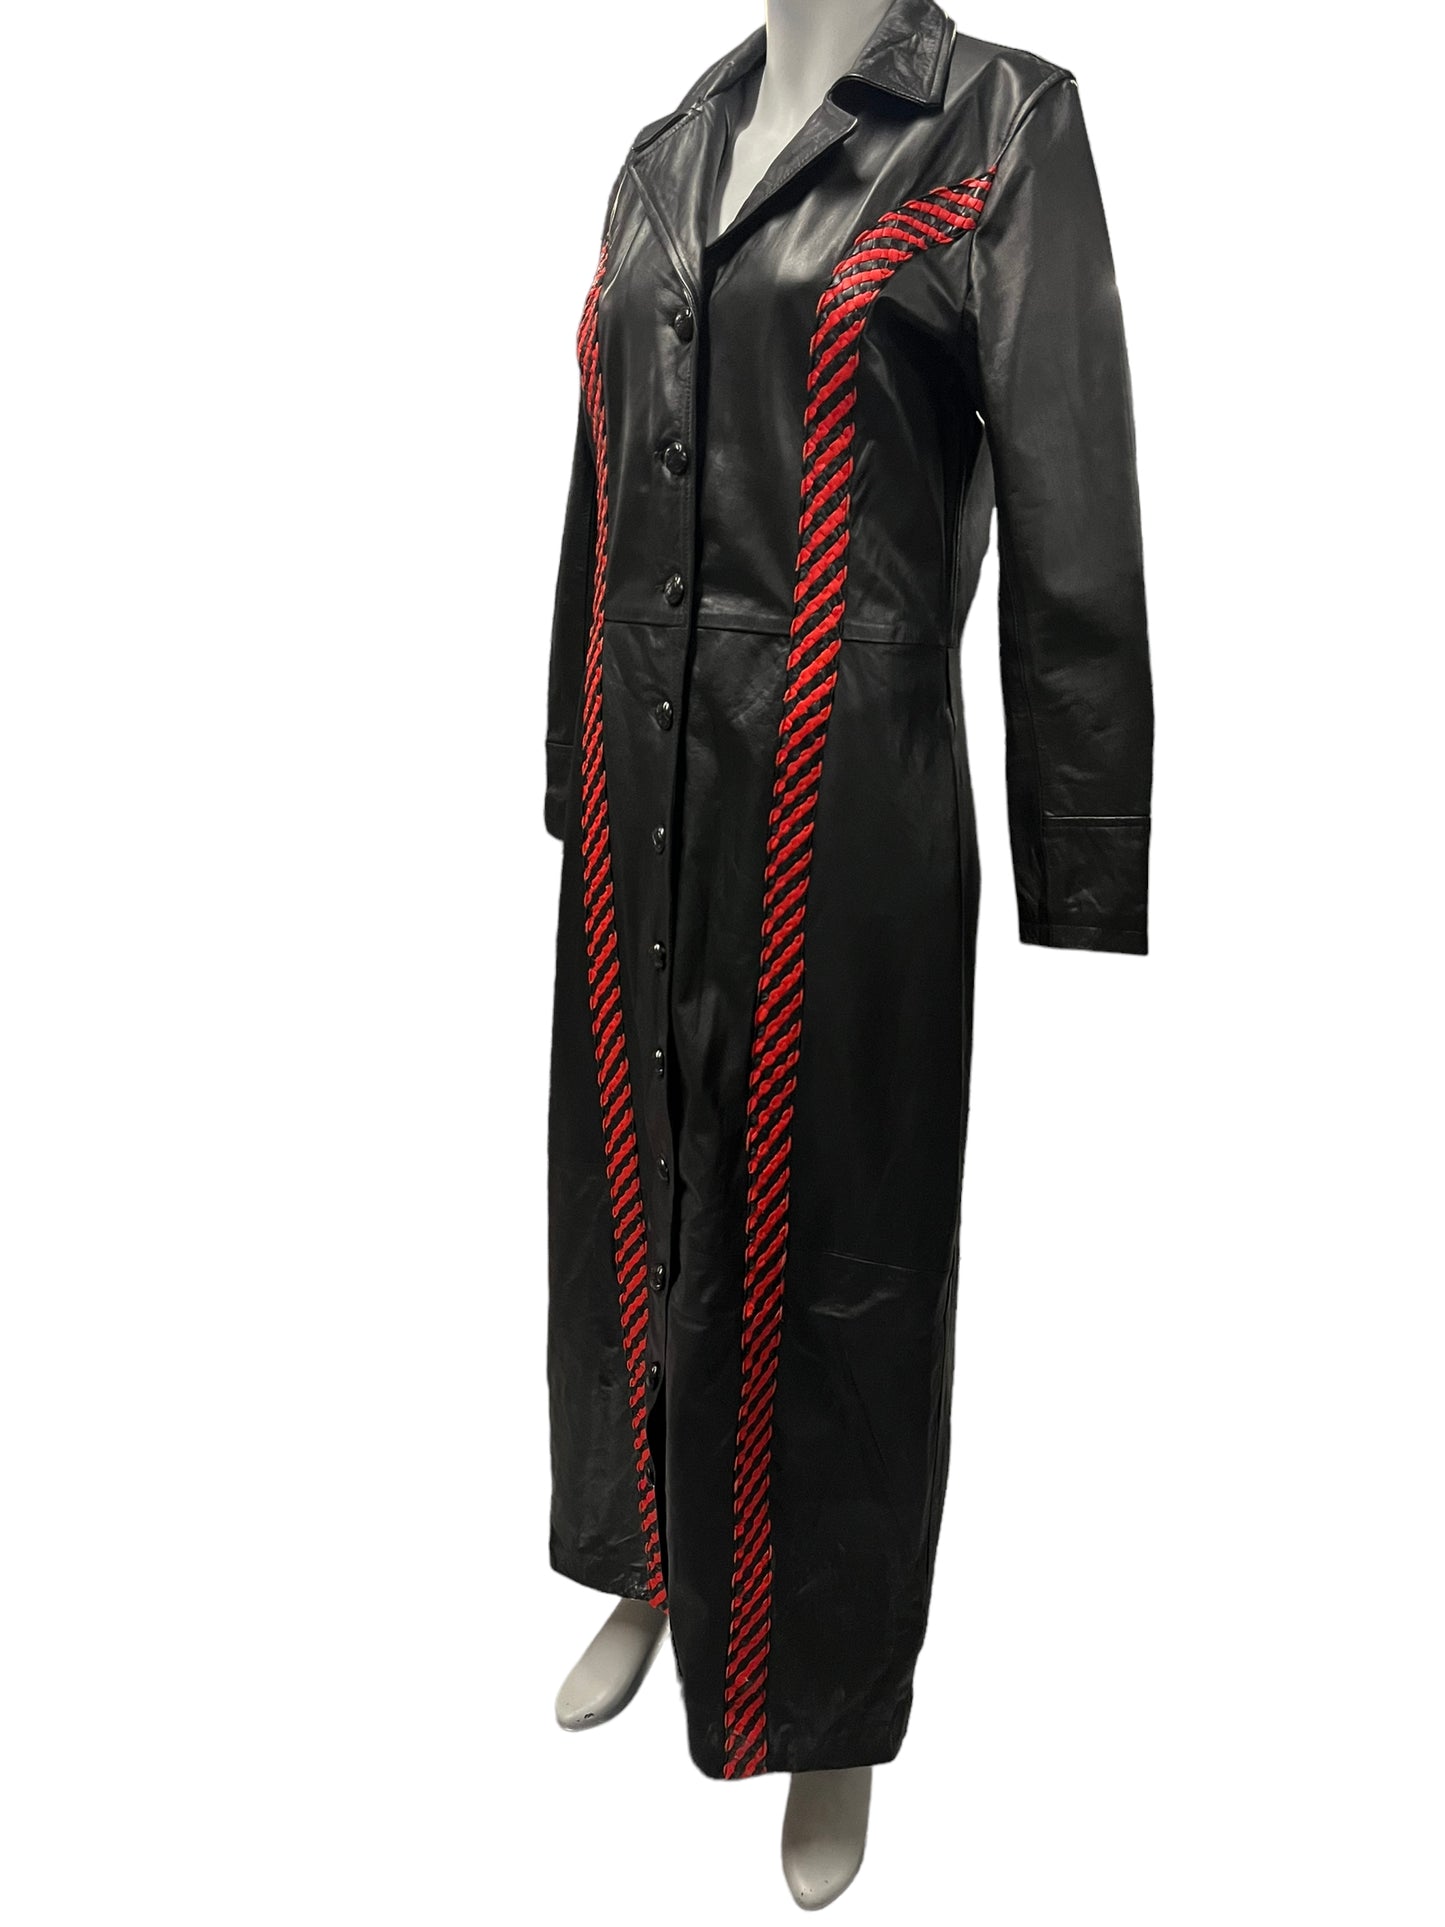 Fashion World - LL154 - Black Long Coat With Red Accents